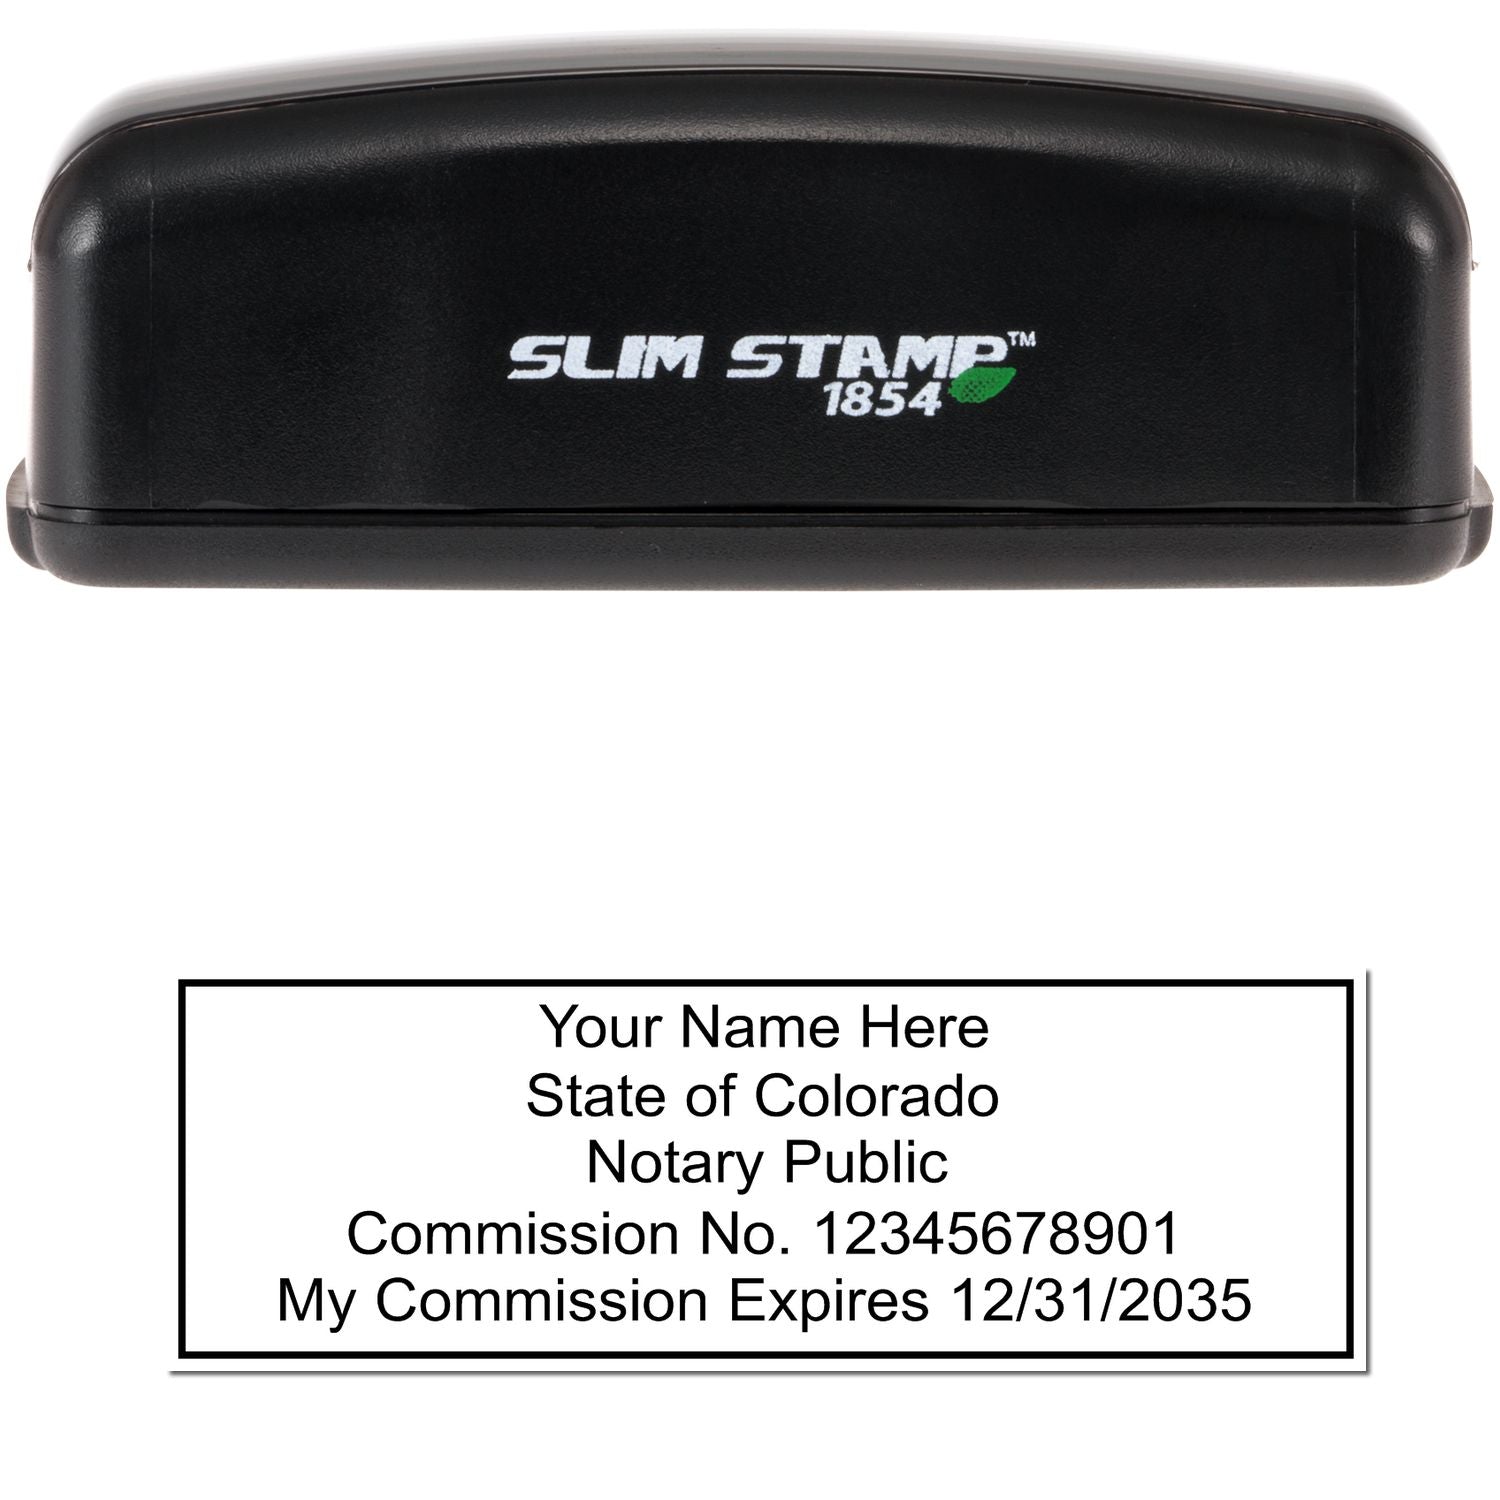 The main image for the Slim Pre-Inked Rectangular Notary Stamp for Colorado depicting a sample of the imprint and electronic files